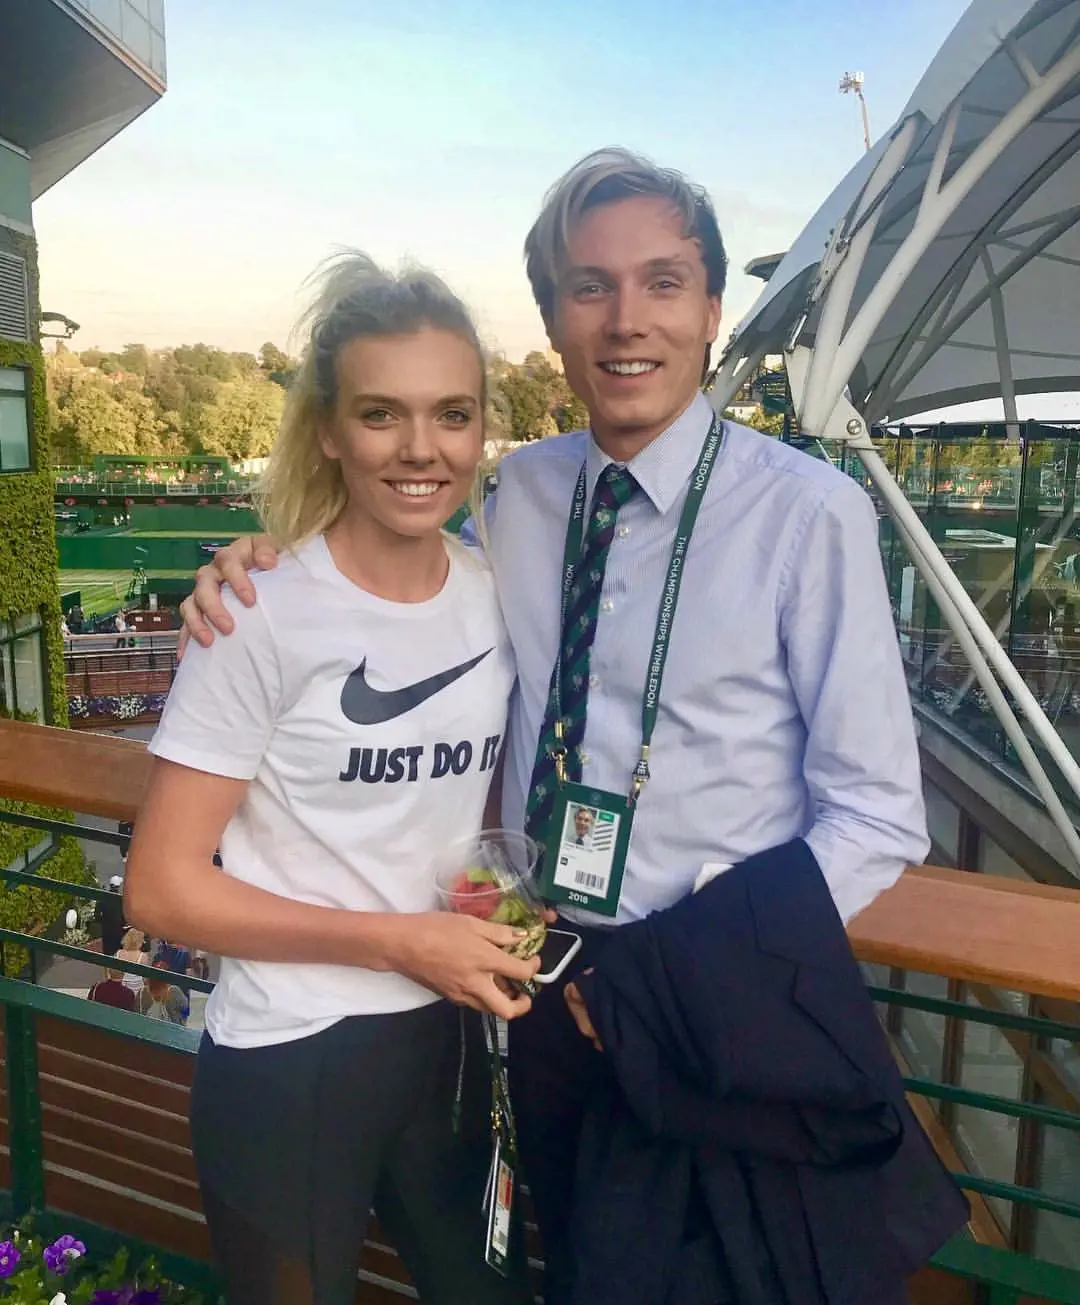 James stood proud with Katie when she won her first match at Wimbledon in 2018.